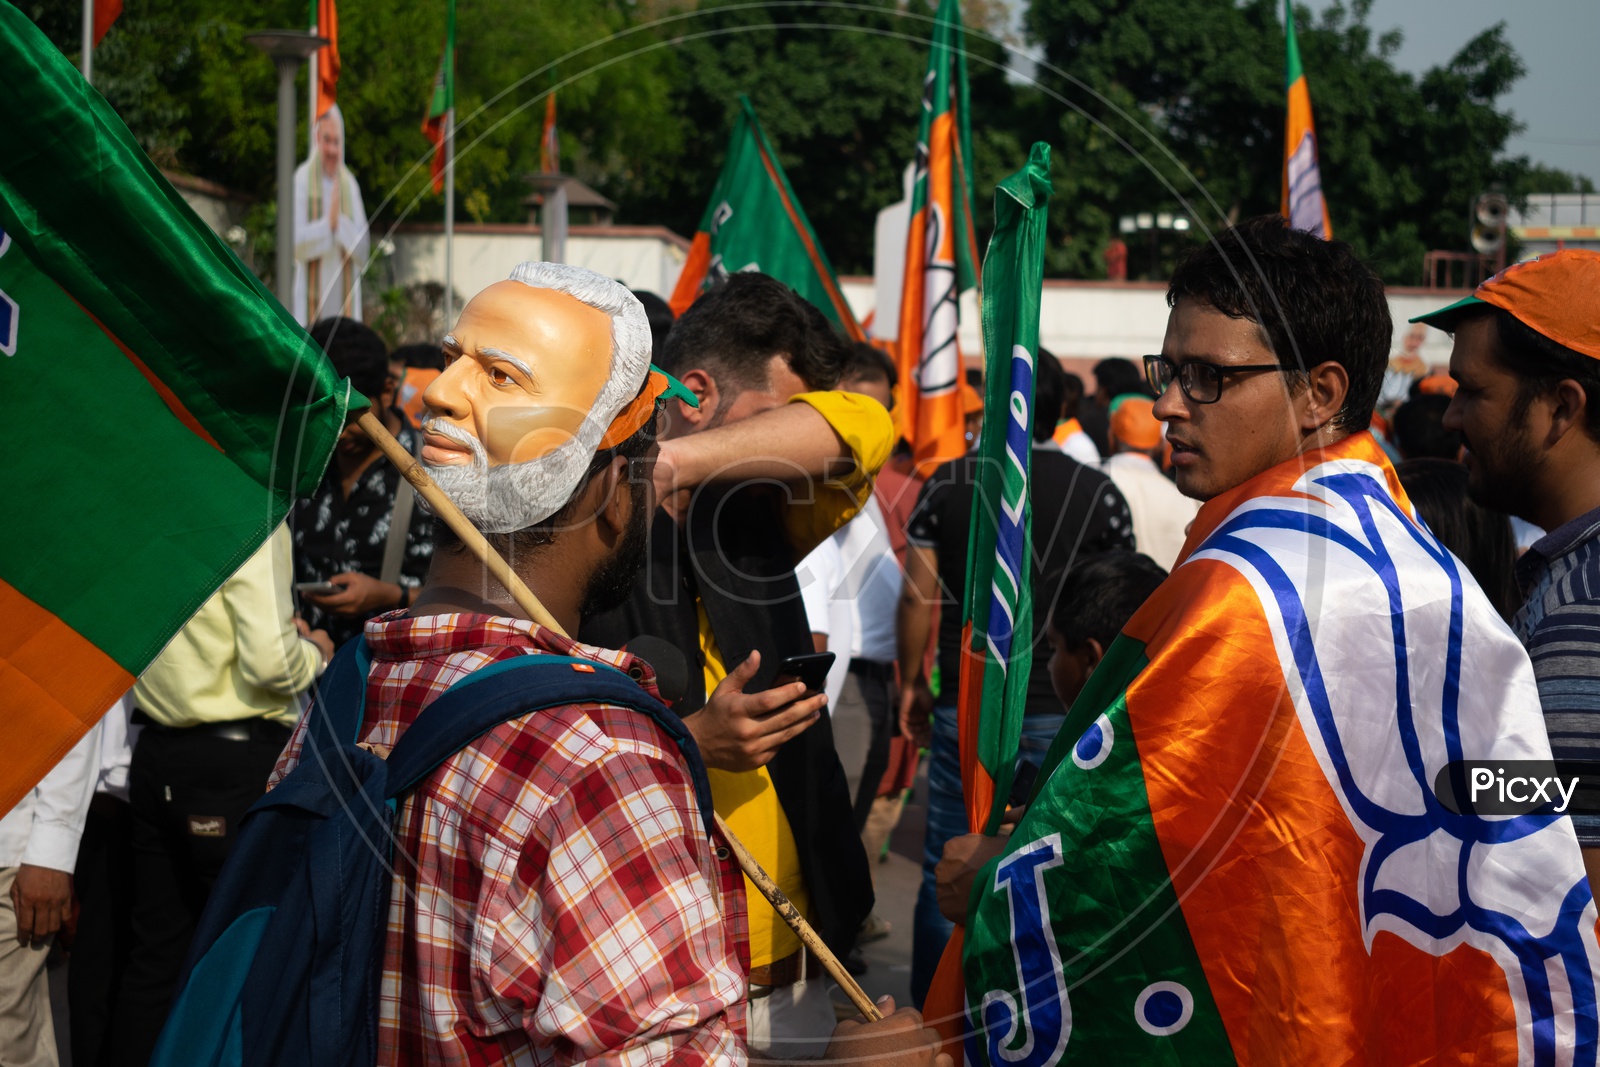 A man wearing mask of Narendra Modi and others holding flags of Bhartiya Janta Party(BJP)